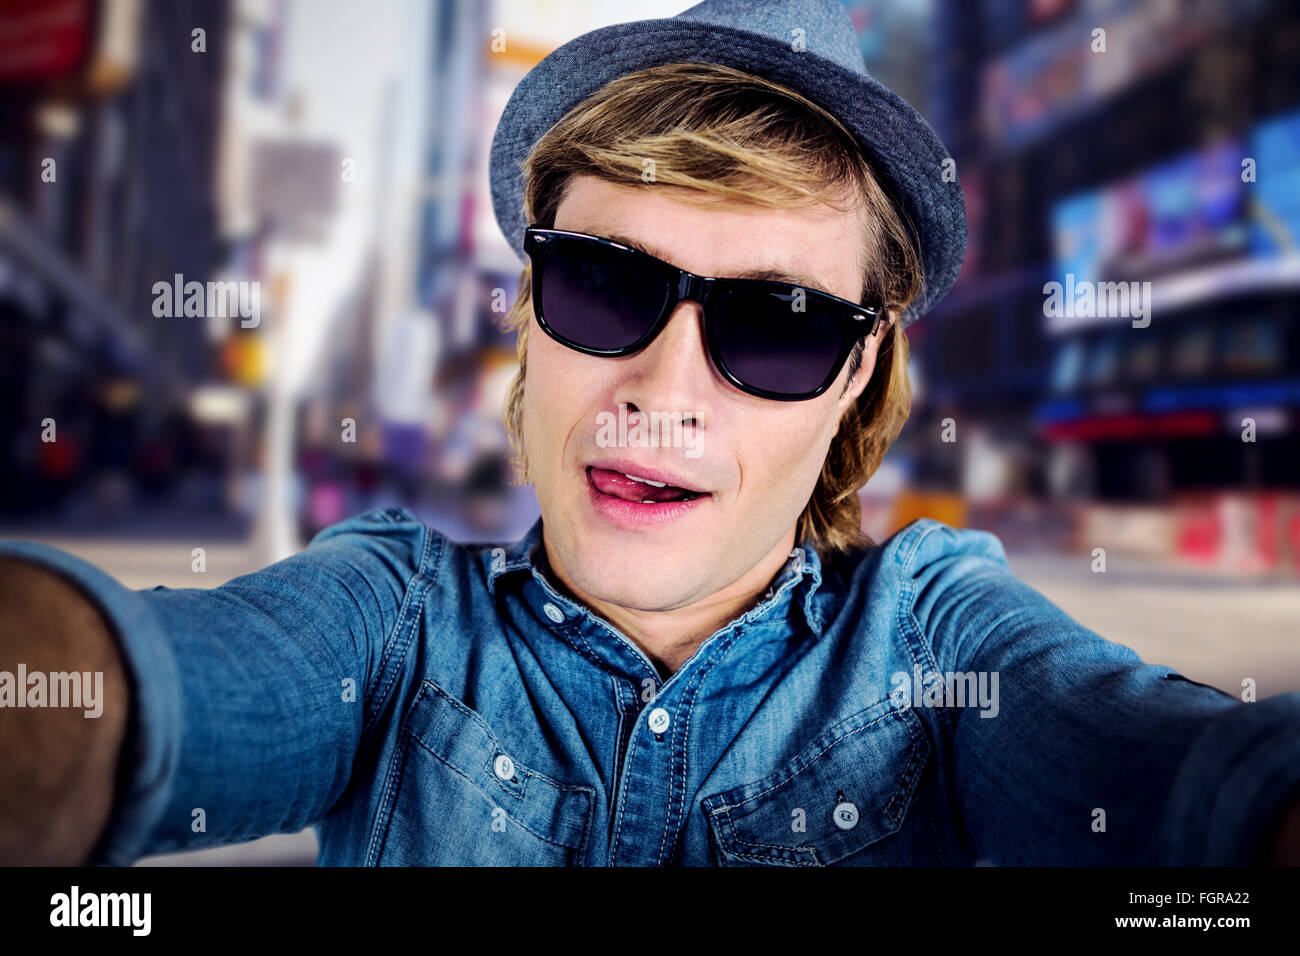 Composite image of crazy hipster wearing sunglasses Stock Photo